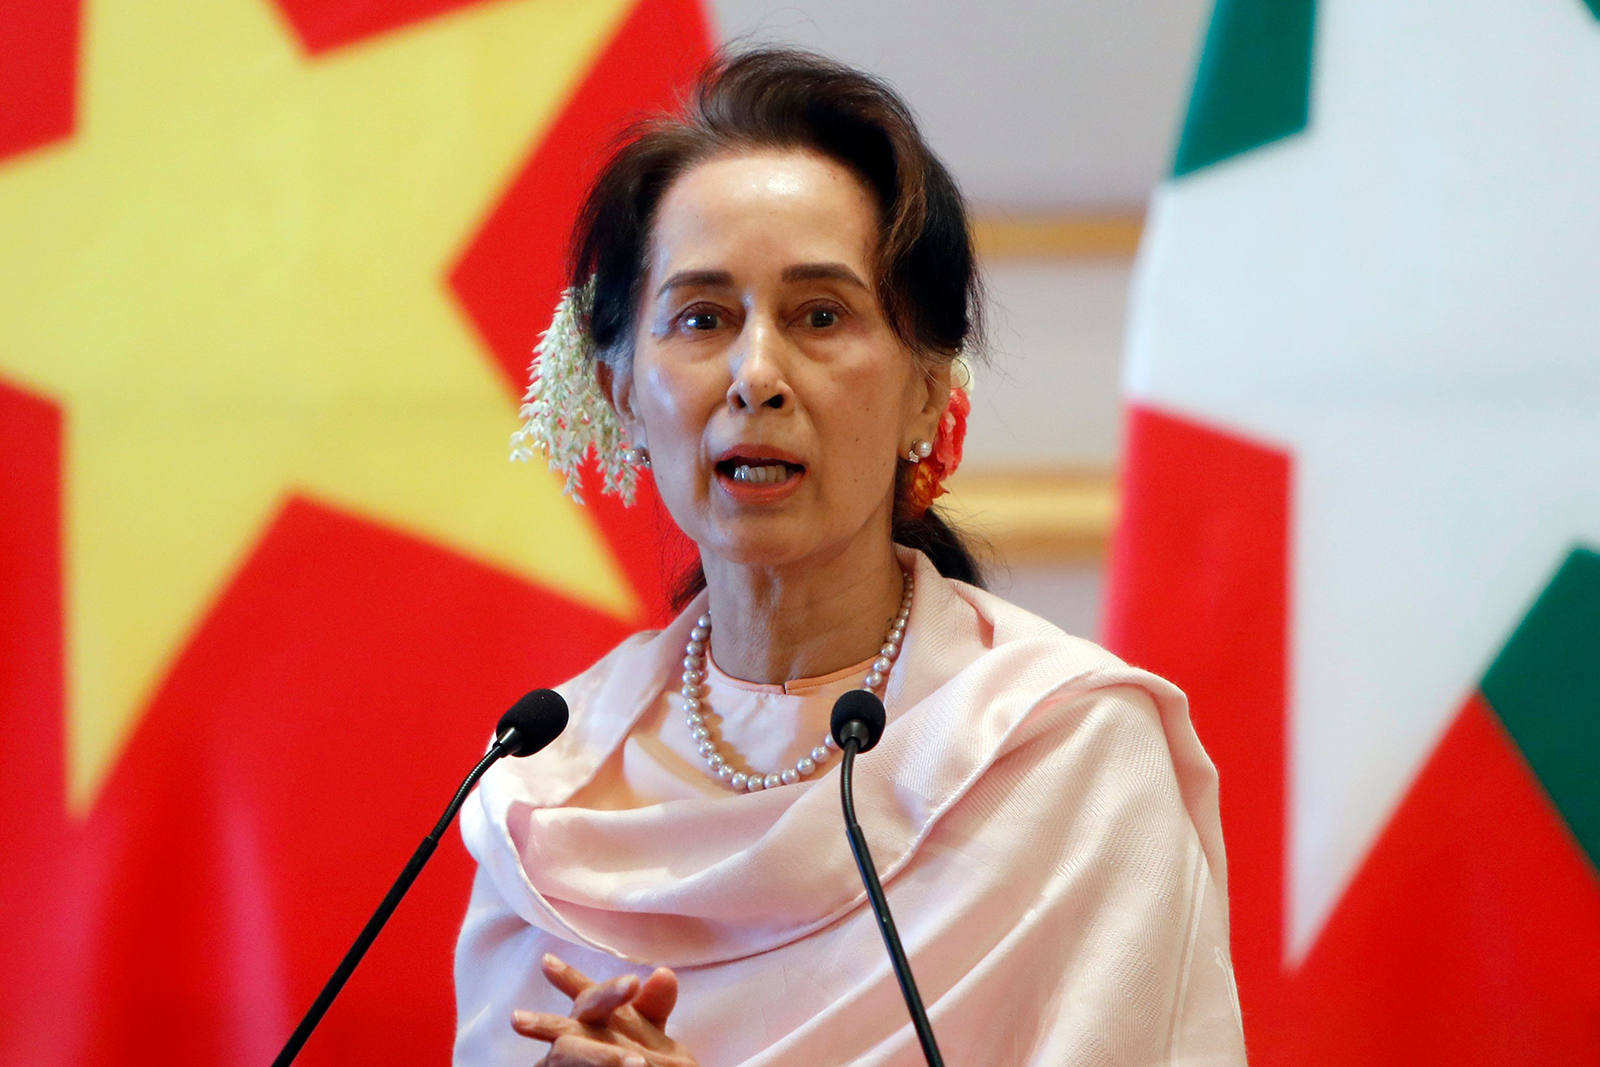 FILE - In this Dec. 17, 2019, file photo, Myanmar's leader Aung San Suu Kyi speaks during a joint press conference with Vietnam's Prime Minister Nguyen Xuan Phuc after their meeting at the Presidential Palace in Naypyitaw, Myanmar. Reports says Monday, Feb. 1, 2021 a military coup has taken place in Myanmar and Suu Kyi has been detained under house arrest. (AP Photo/Aung Shine Oo, File)